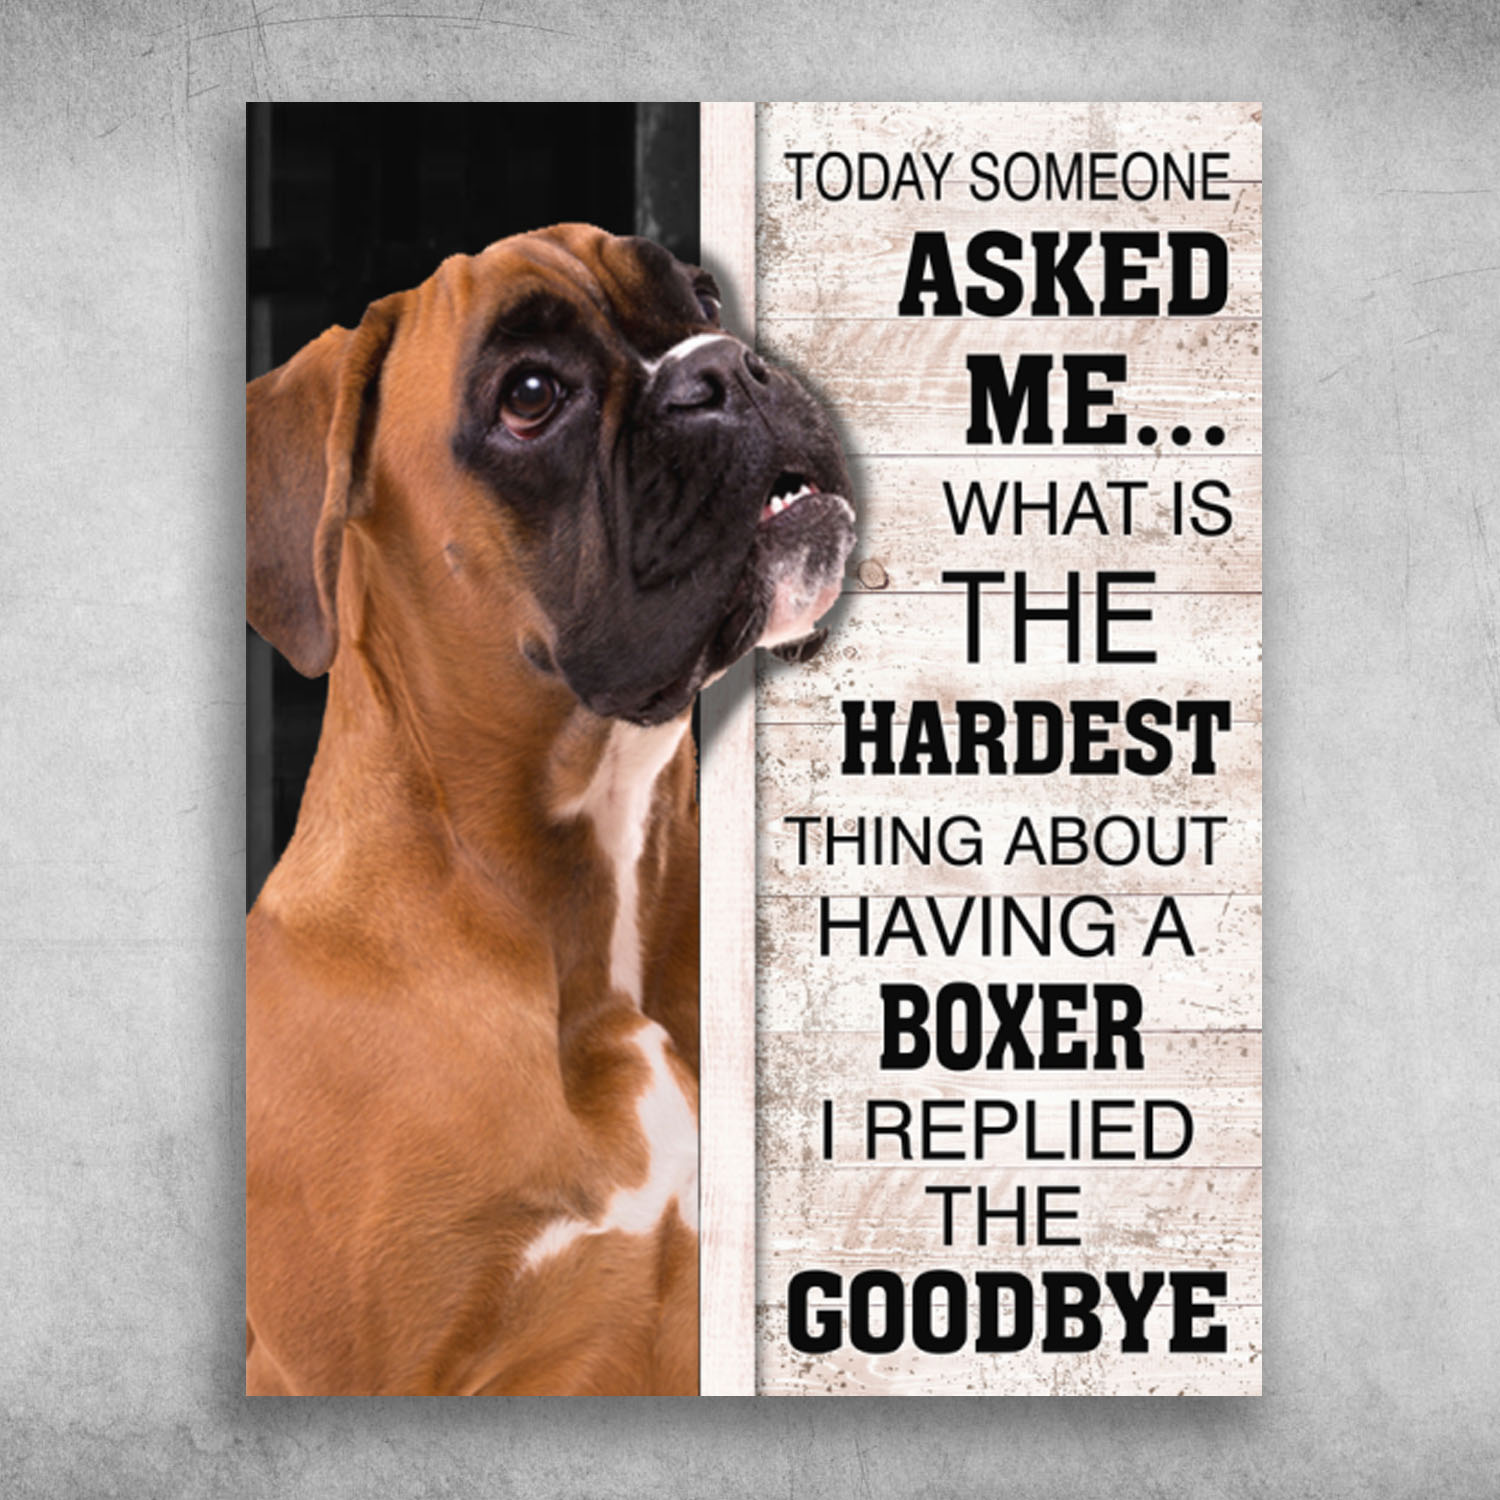 The Hardest Thing About Having A Boxer I Replied The Goodbye